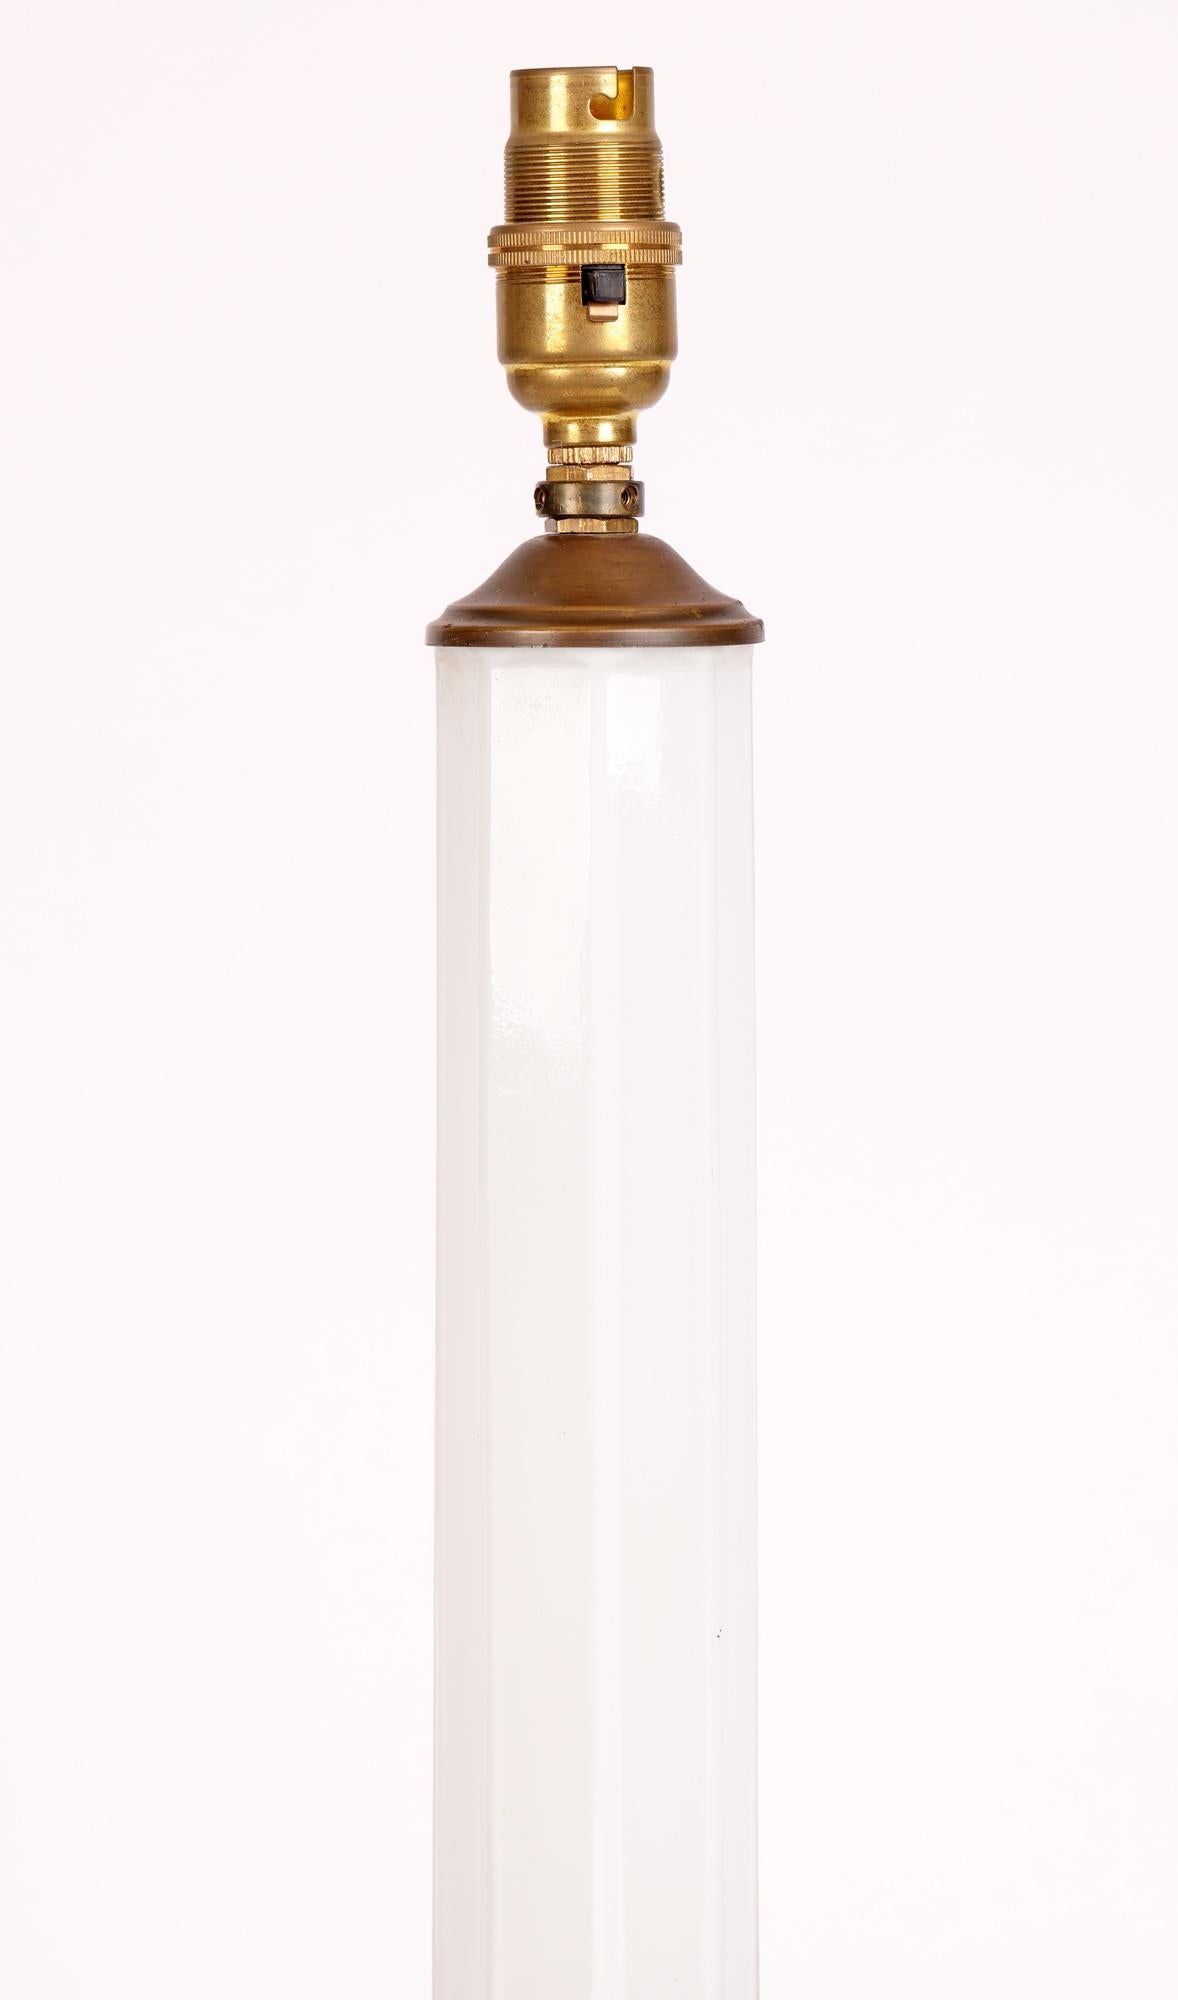 A very stylish elegant and tall white cased glass column shaped lamp base, the design probably based on a street light design of the period and dating between 1930 and 1950. The lamp is made in two sections with the lower section modeled as a